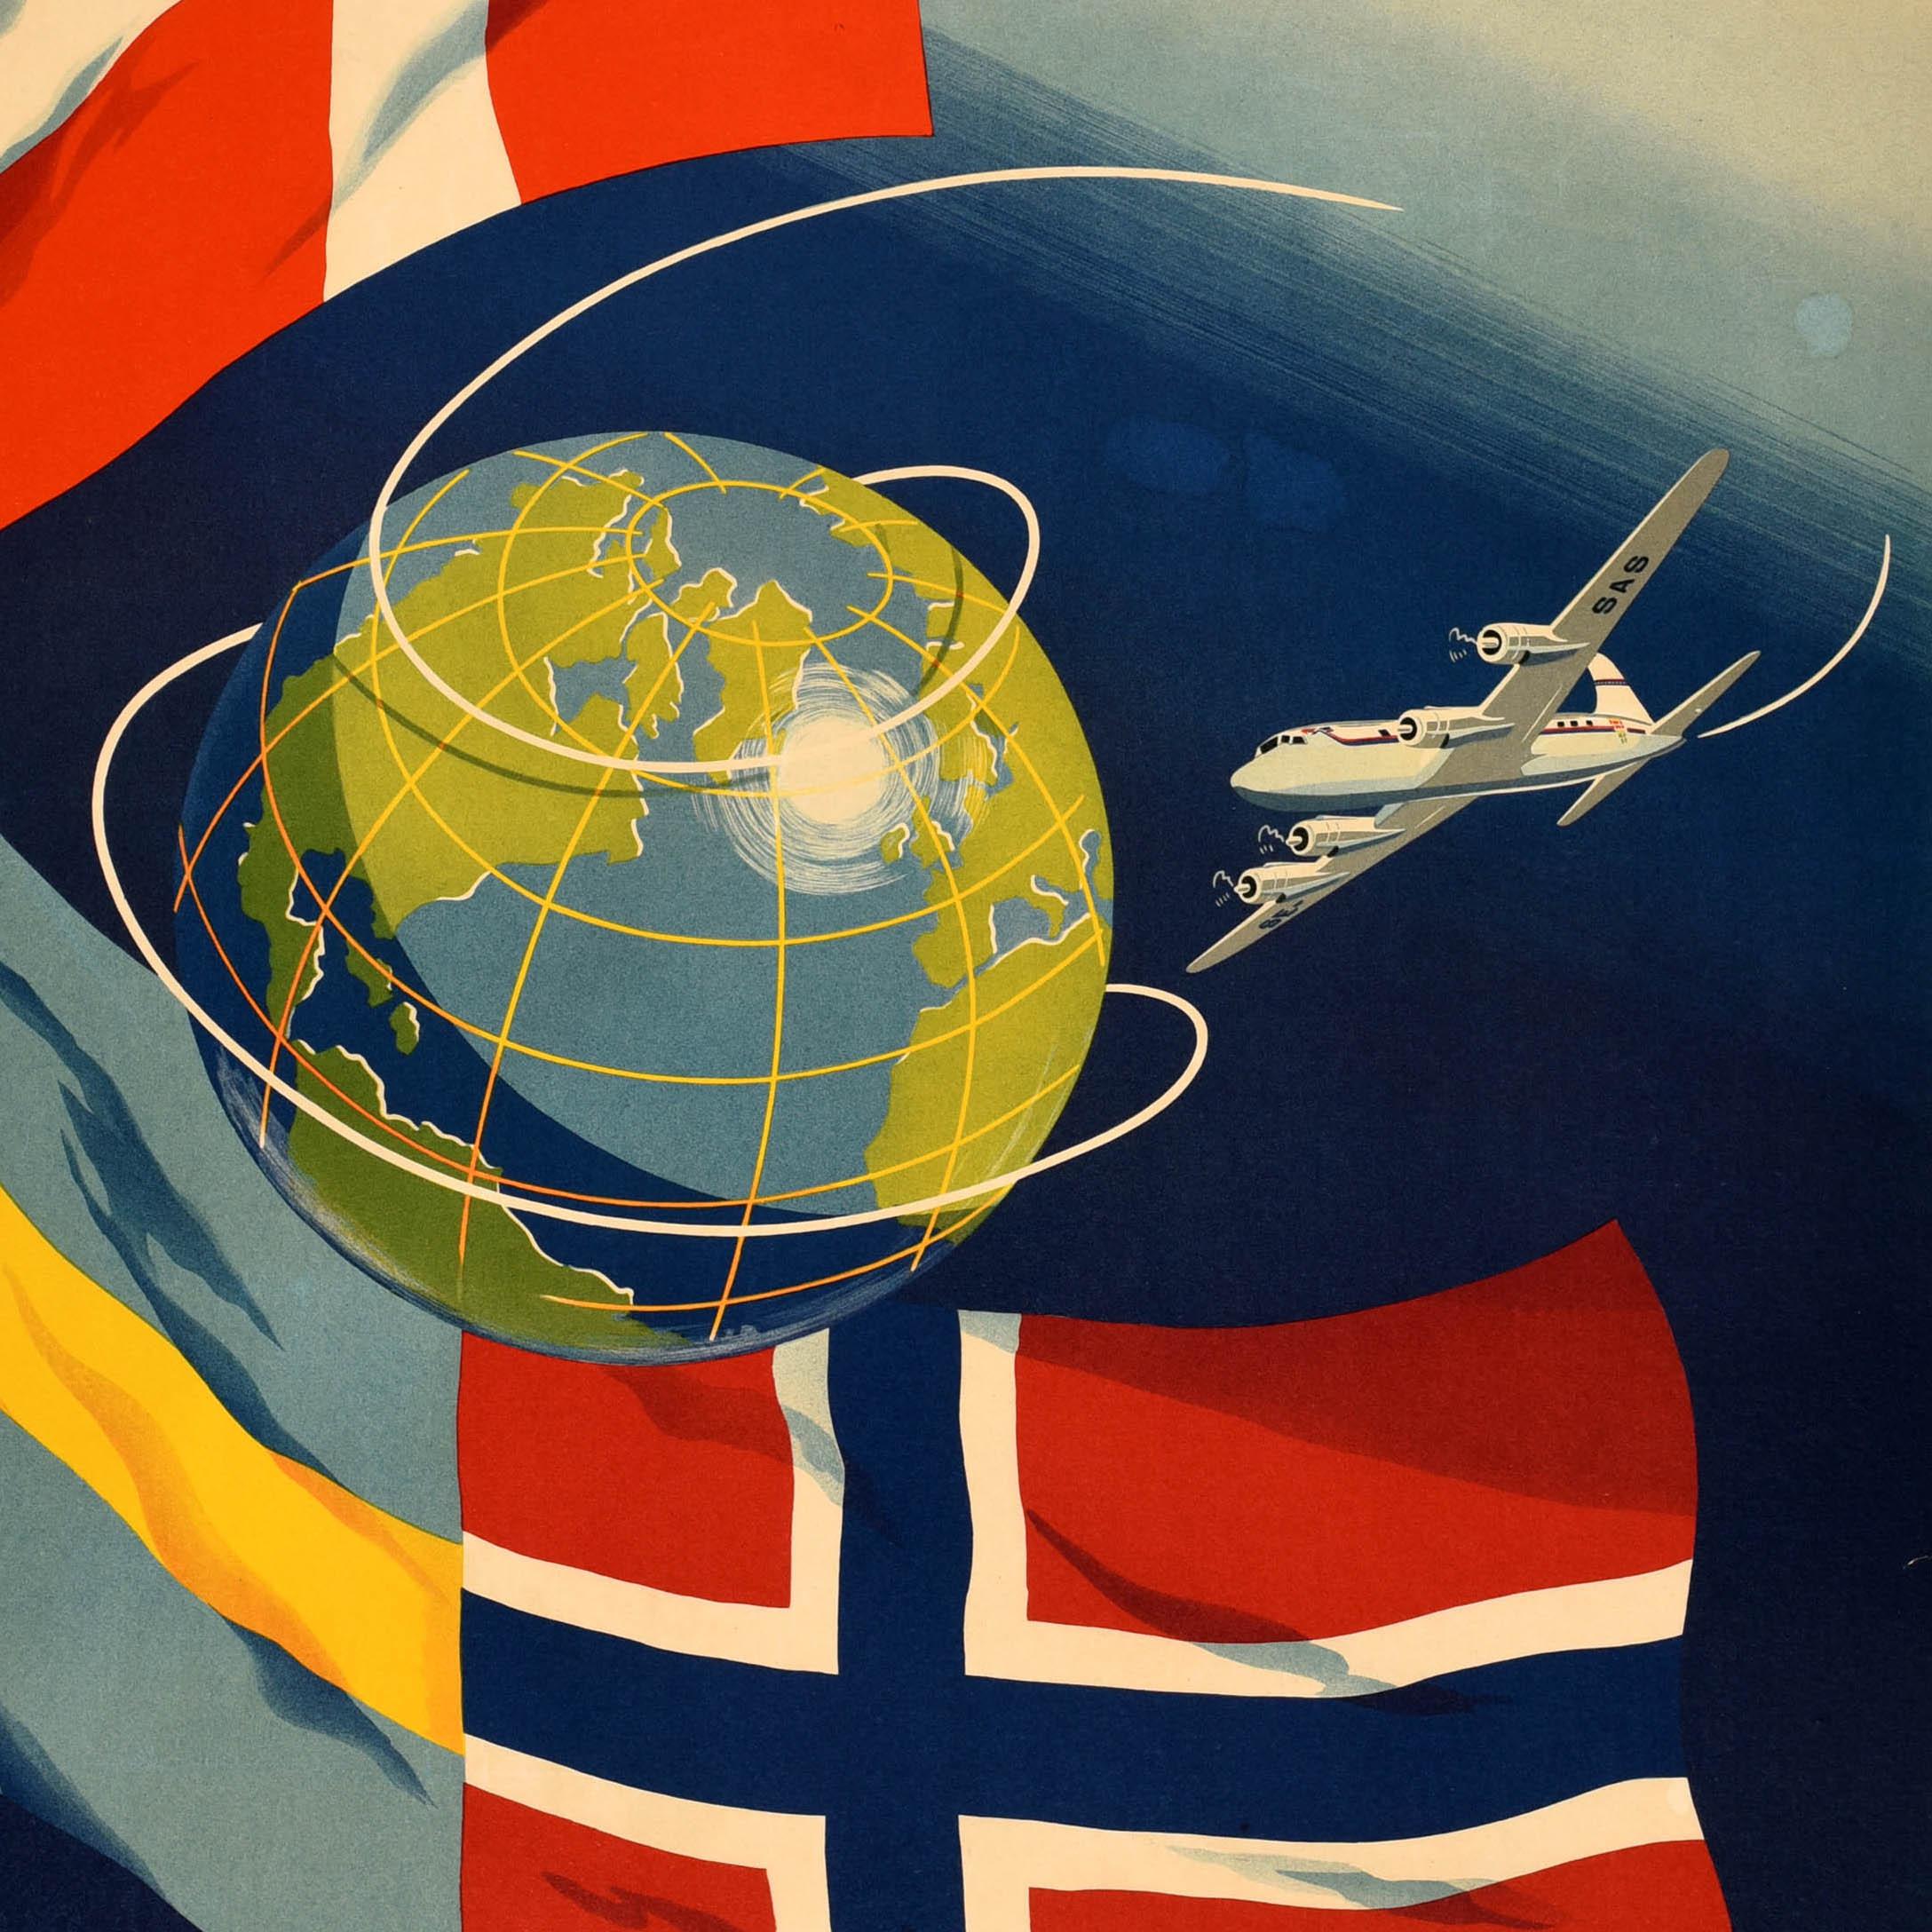 Original vintage travel advertising poster for SAS Scandinavian Airlines System featuring a colourful design depicting a plane flying around the globe with the flags of Sweden, Norway and Denmark flying against the blue and white shaded background,